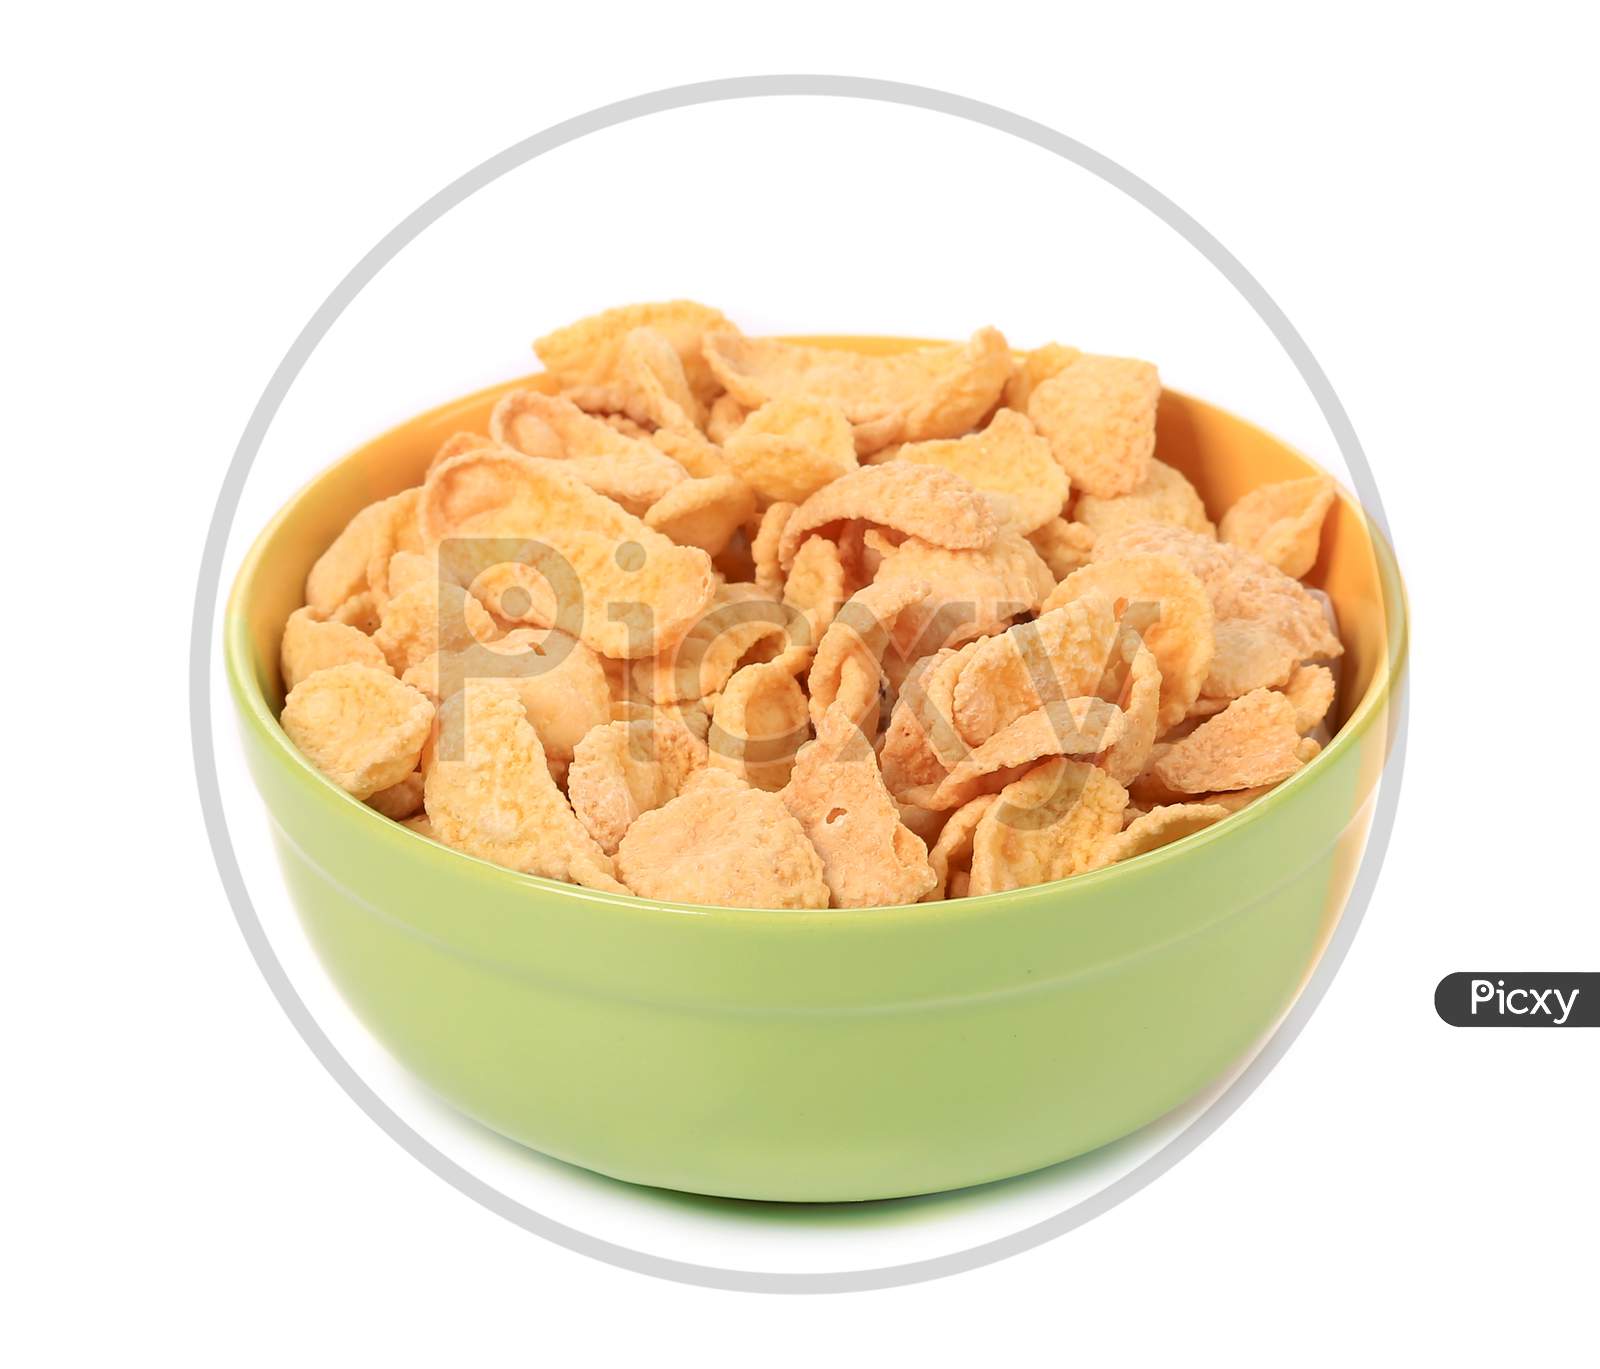 Bowl Of Sugar-Coated Corn Flakes. Isolated On A White Background.